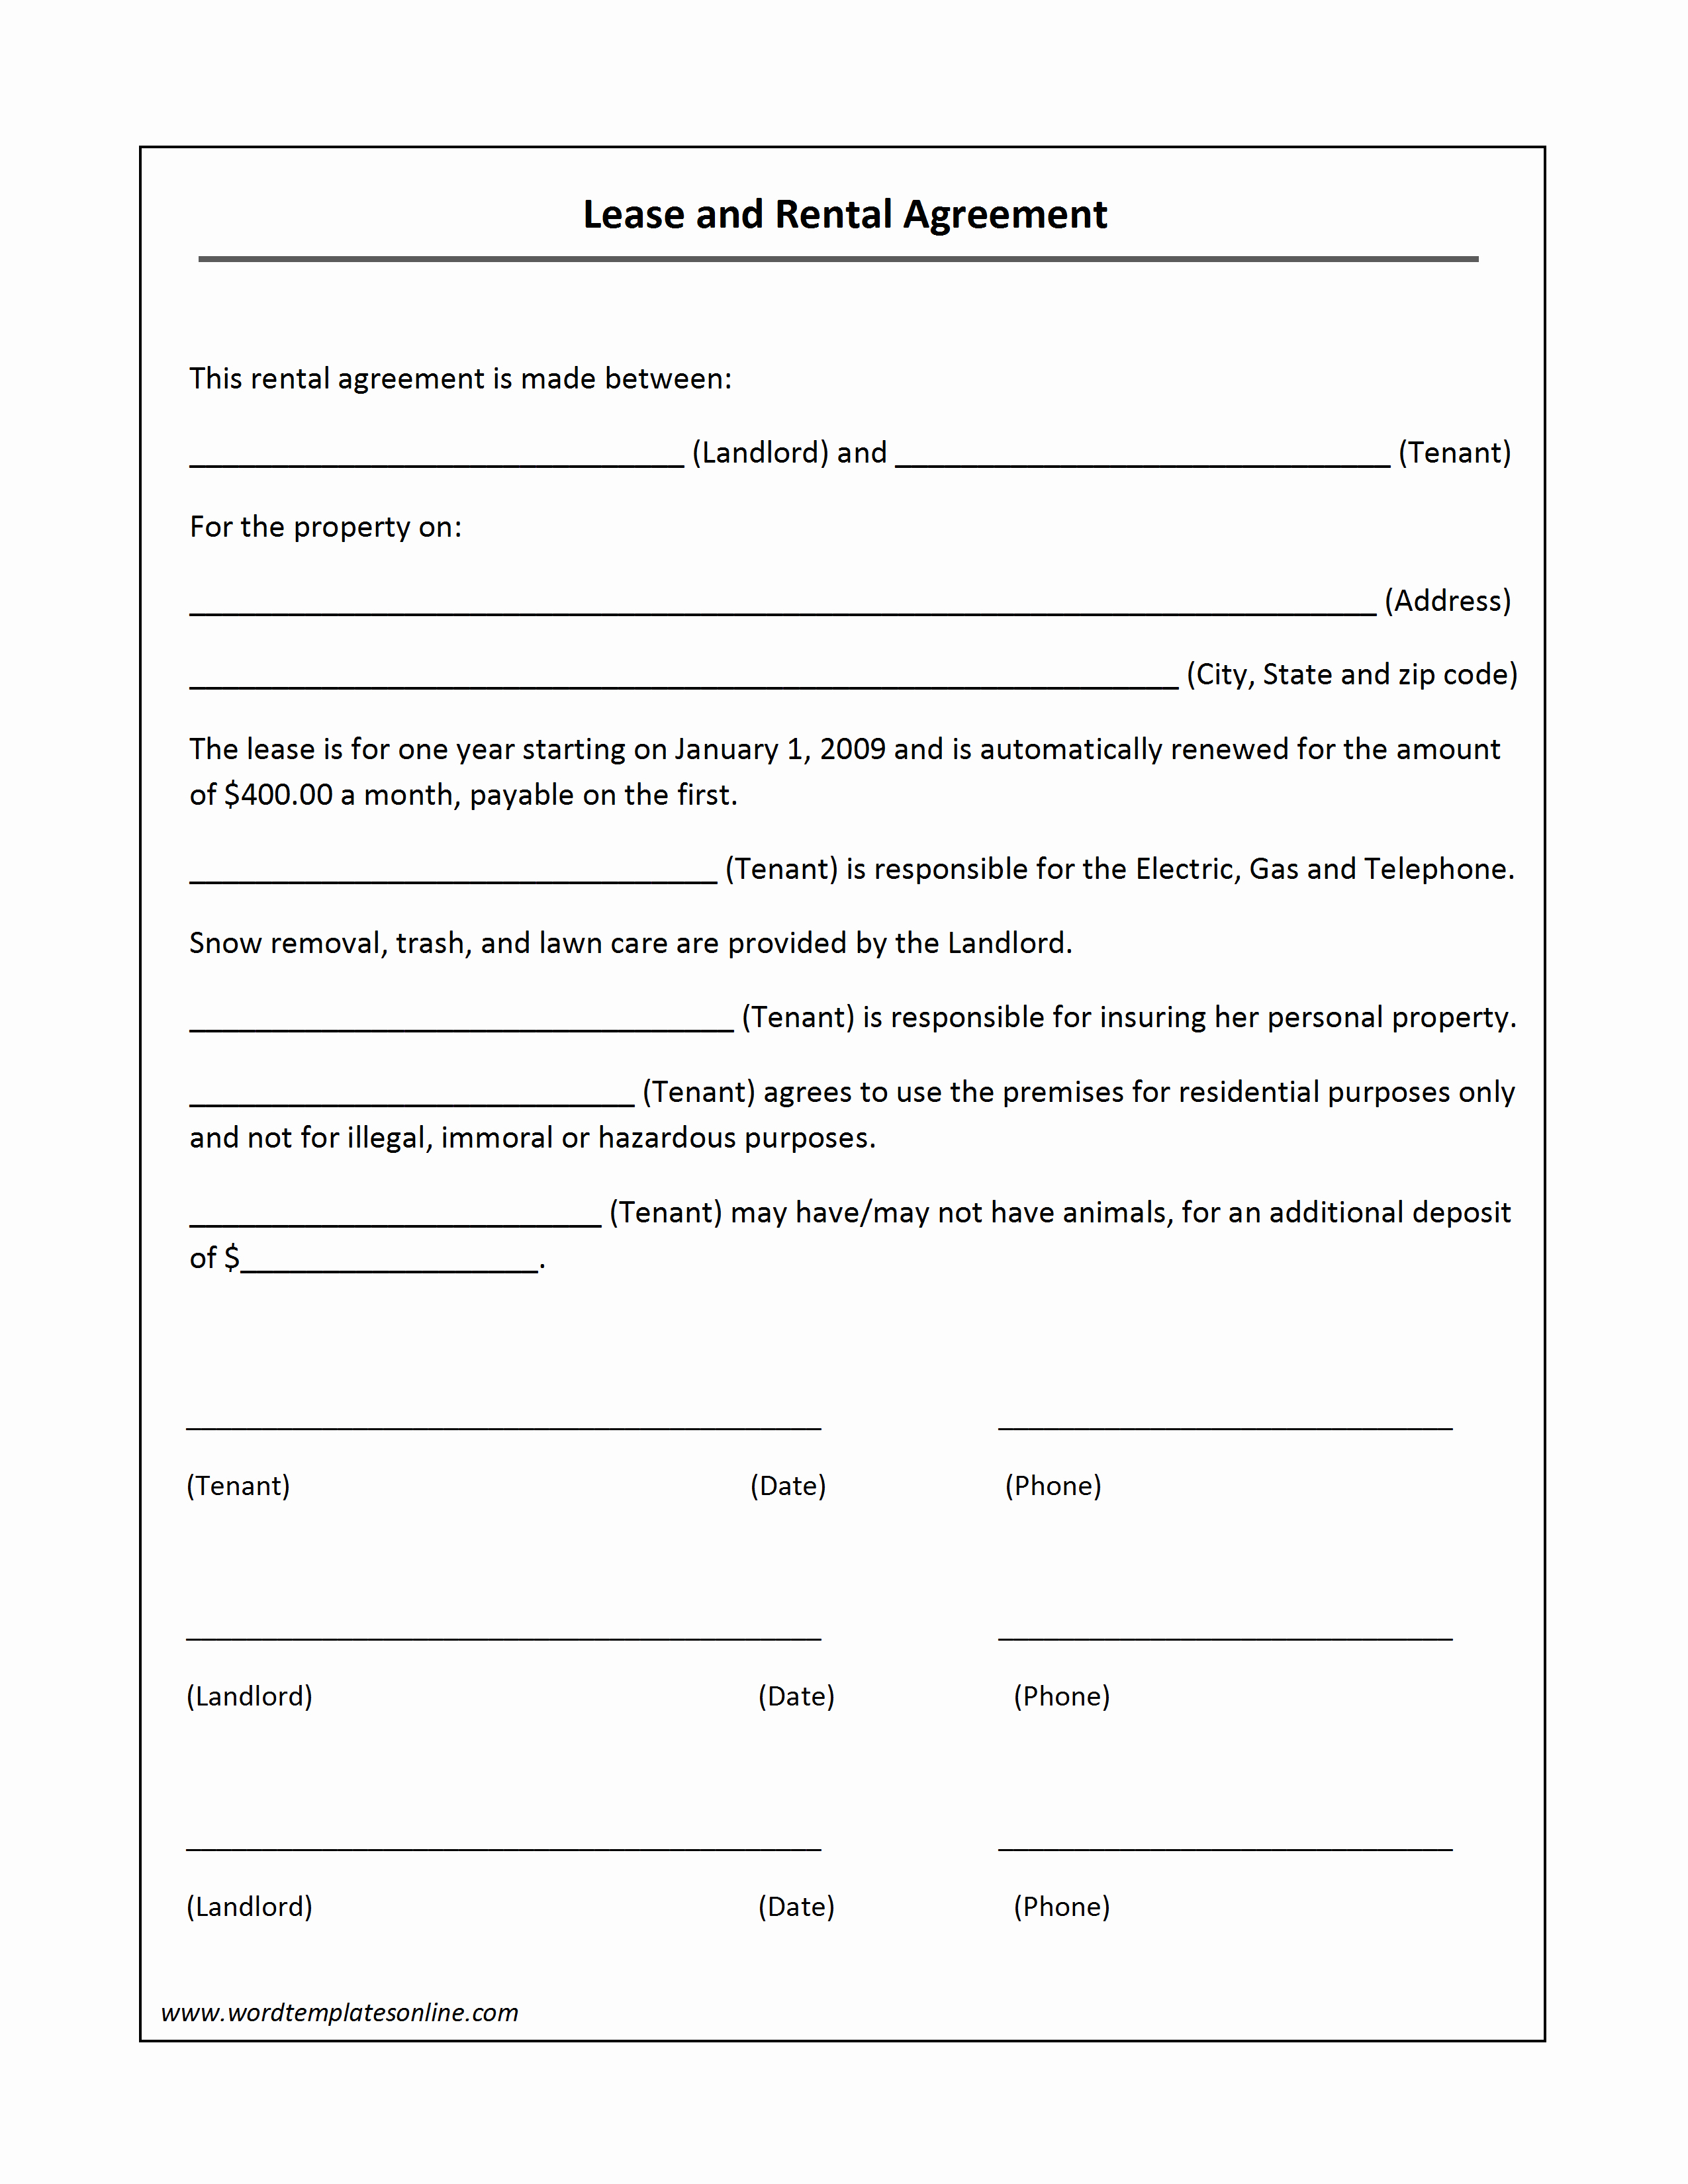 Template Lease Agreement 009 Simple Land Lease Agreement Template Elegant Of Dreaded Ideas Nz